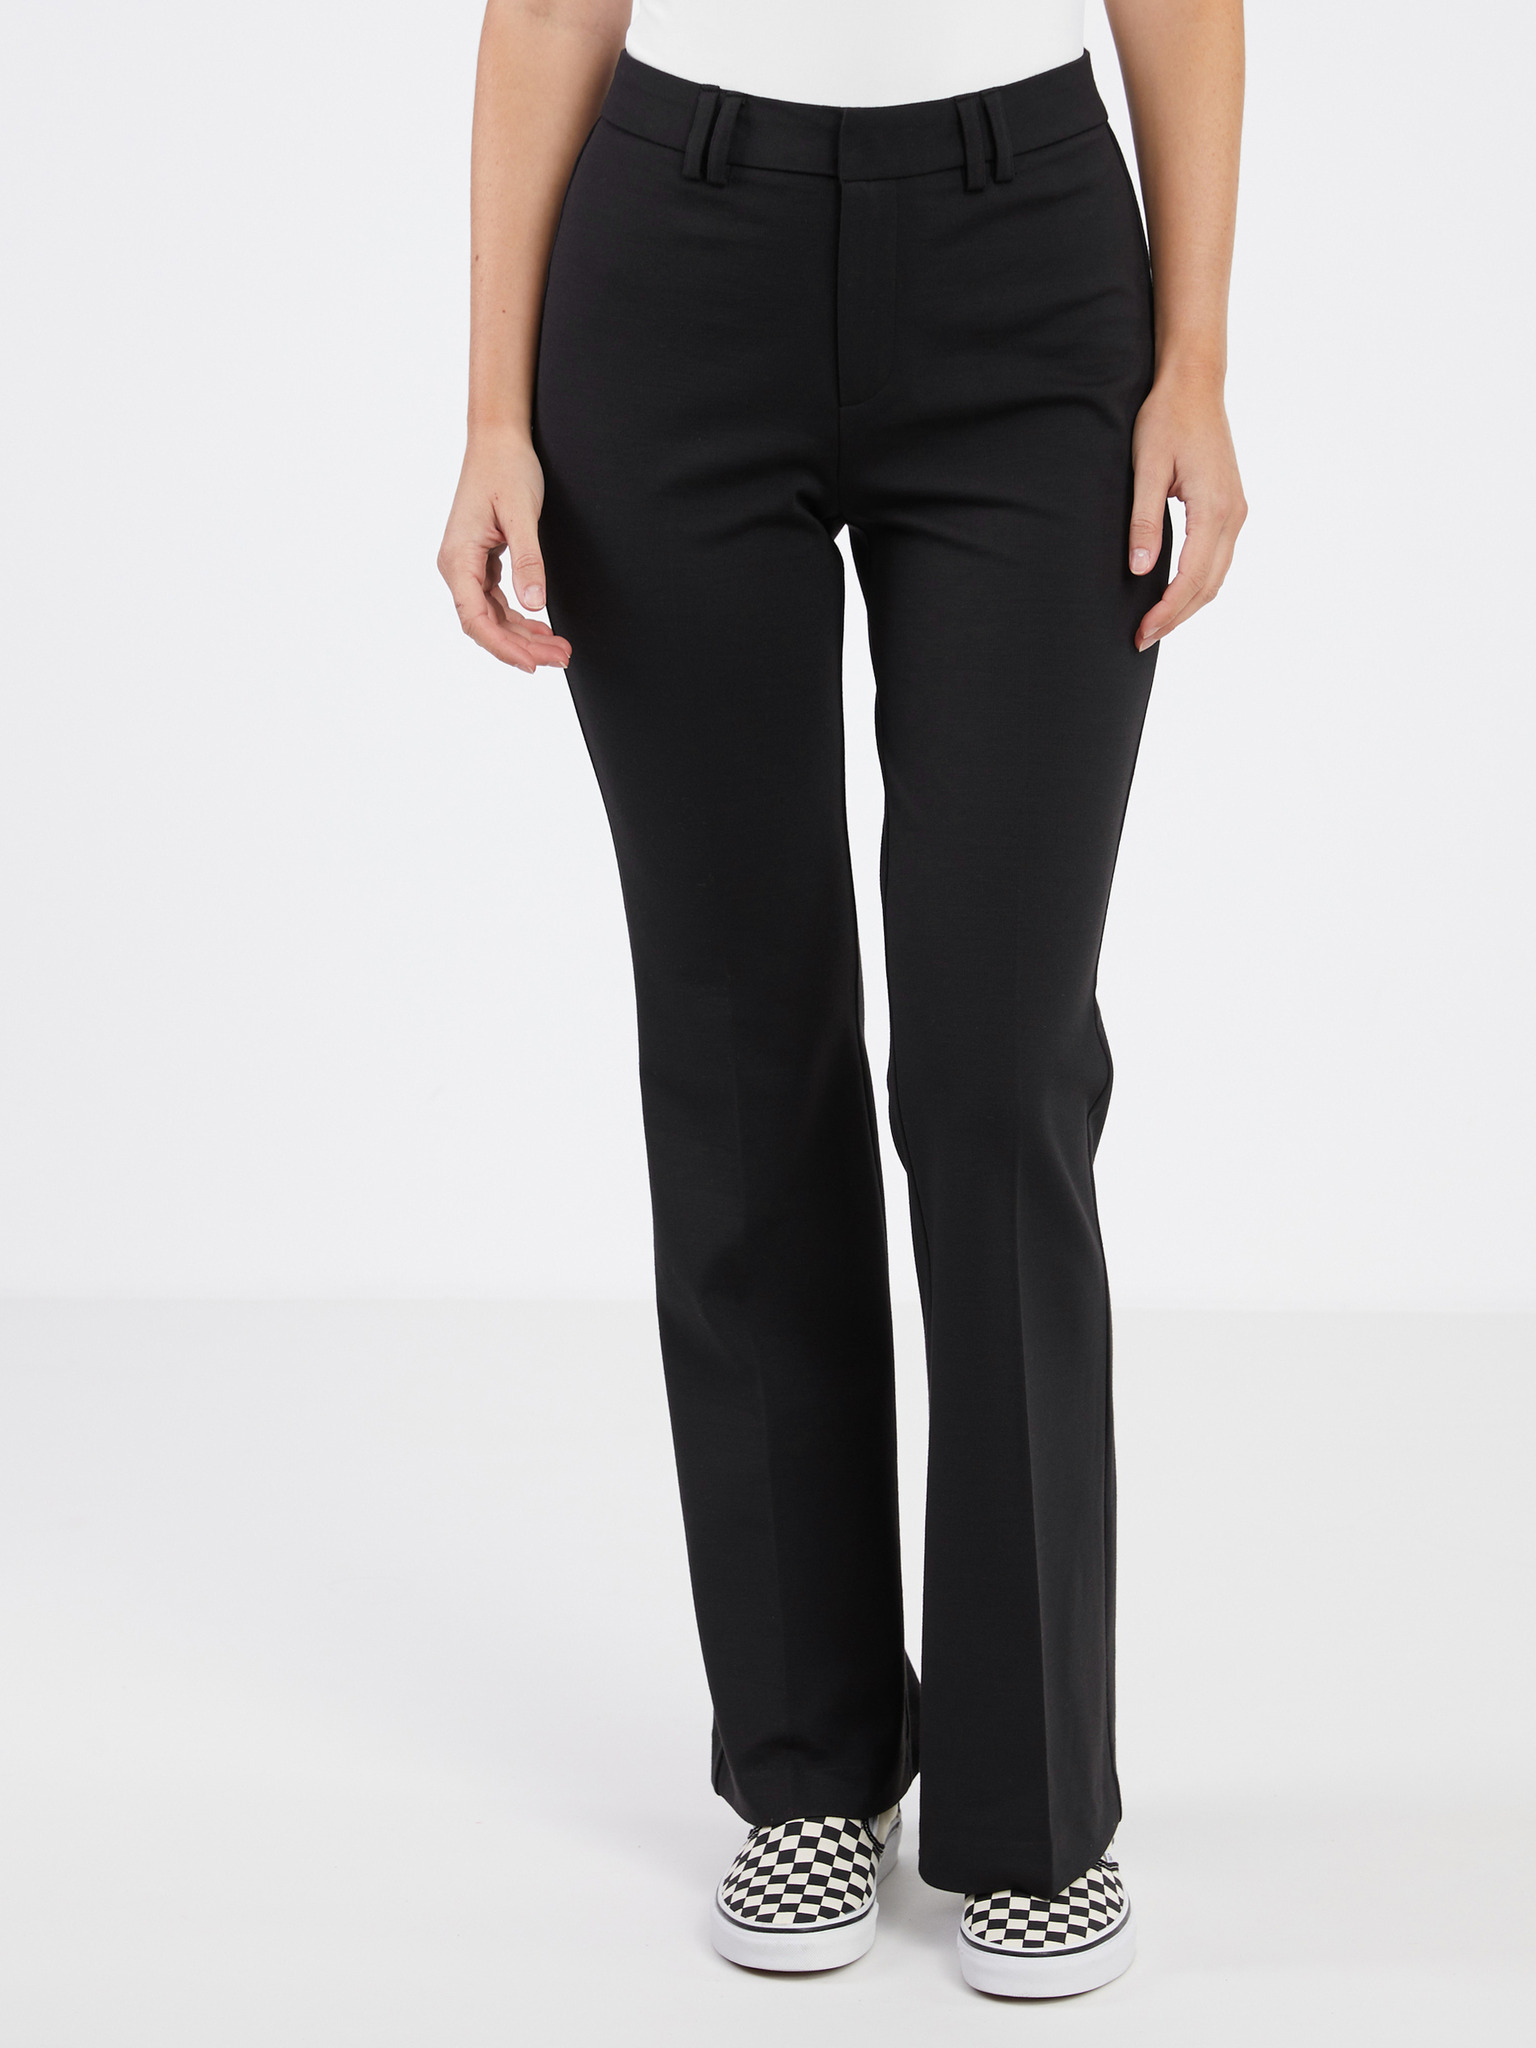 Buy Peach Rayon Solid Women Regular Wear Pant for Best Price, Reviews, Free  Shipping